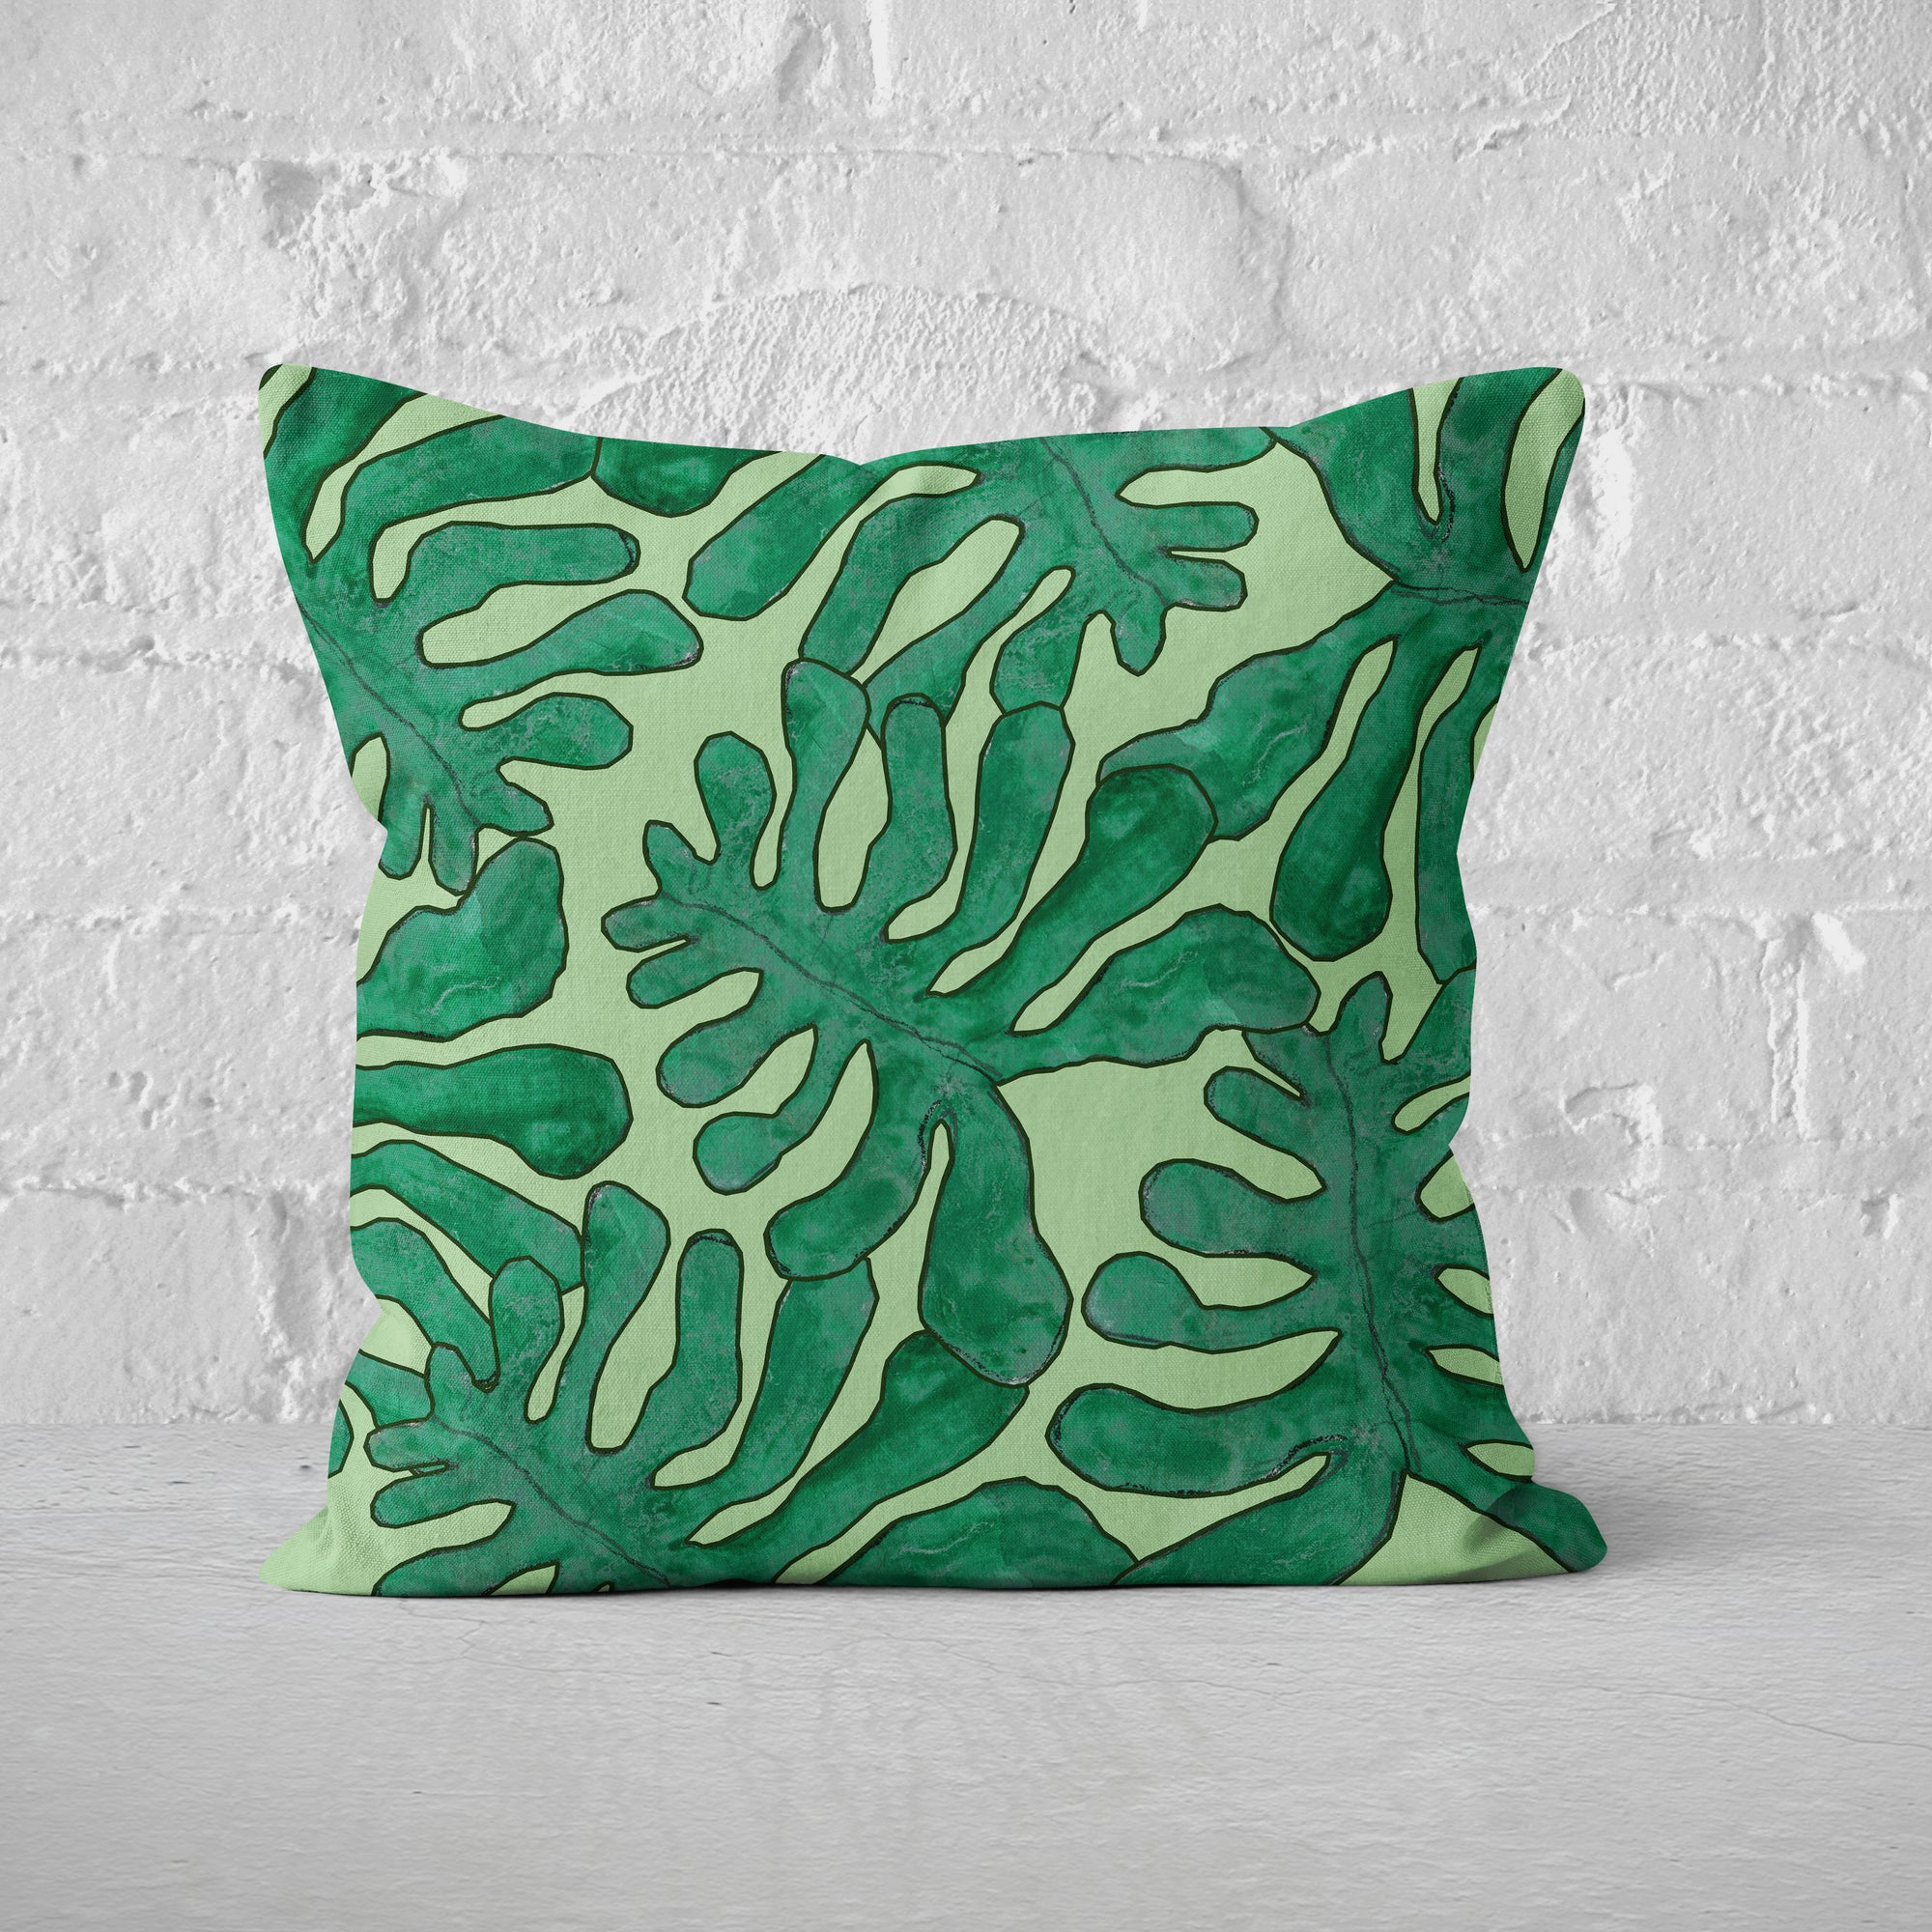 Pillow Cover Feature Art 'Palms' - Green - Cotton Twill